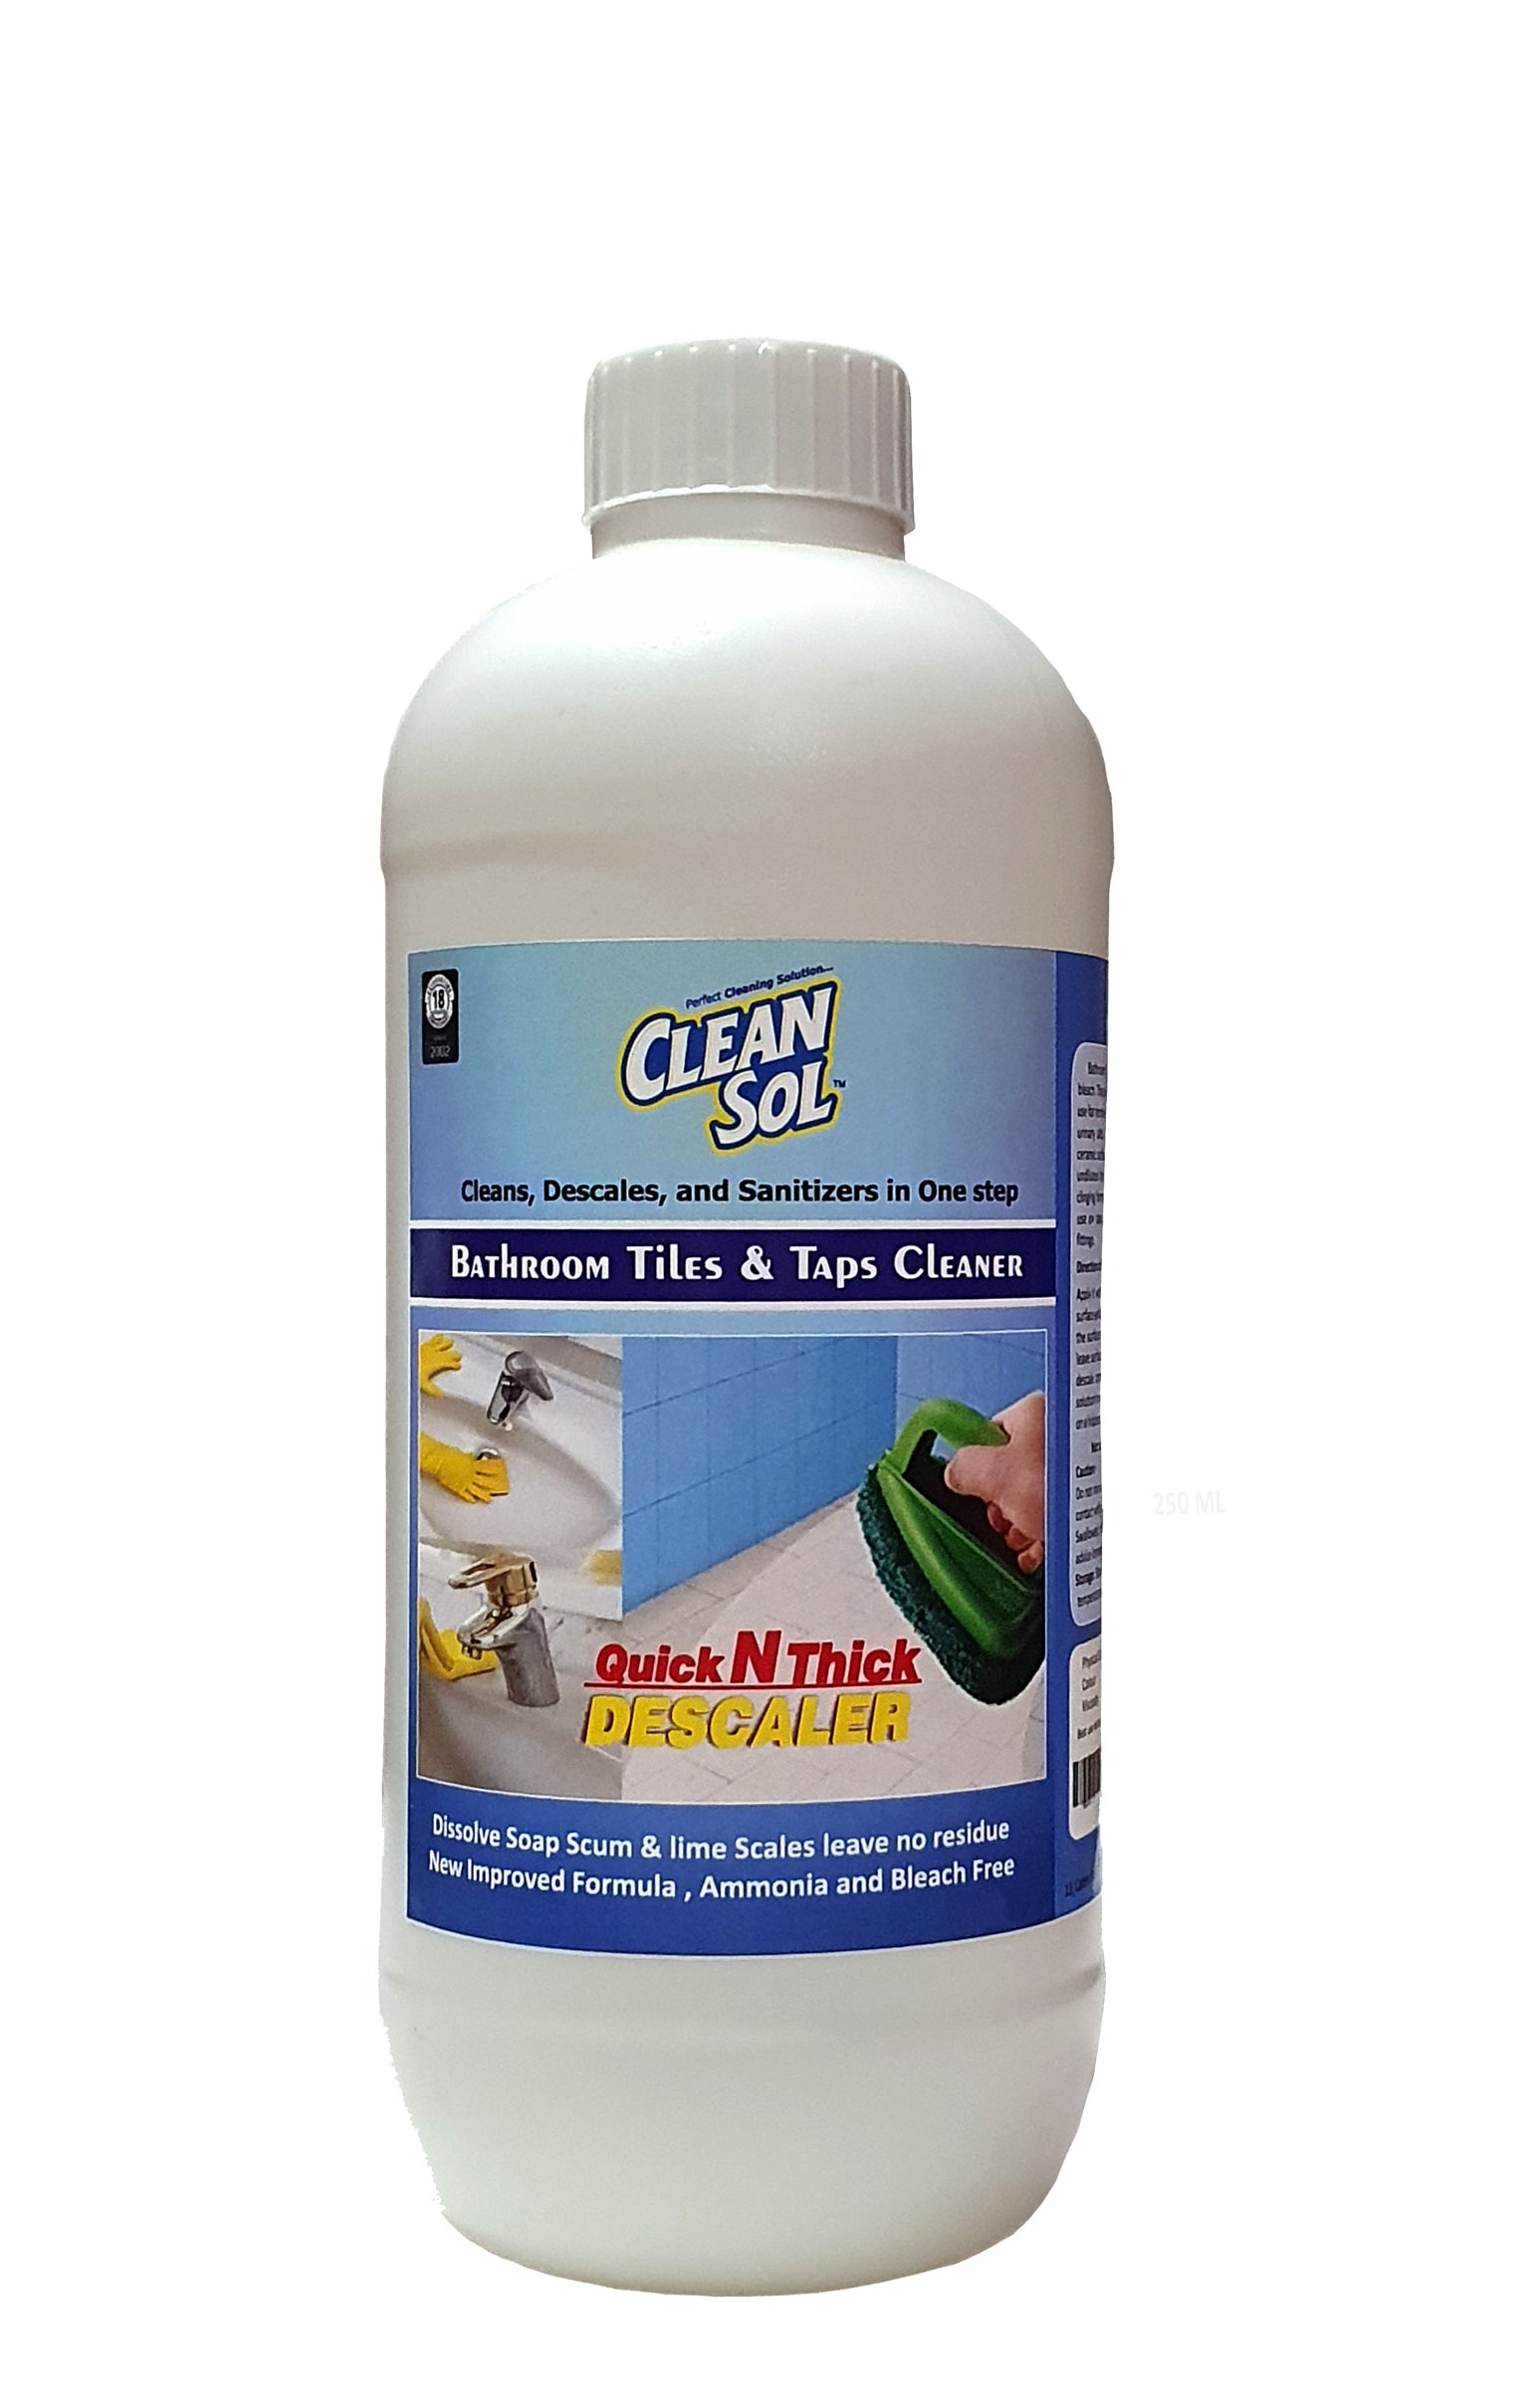 Cleansol Bathroom & Tiles Cleaner (Hard water stain remover)